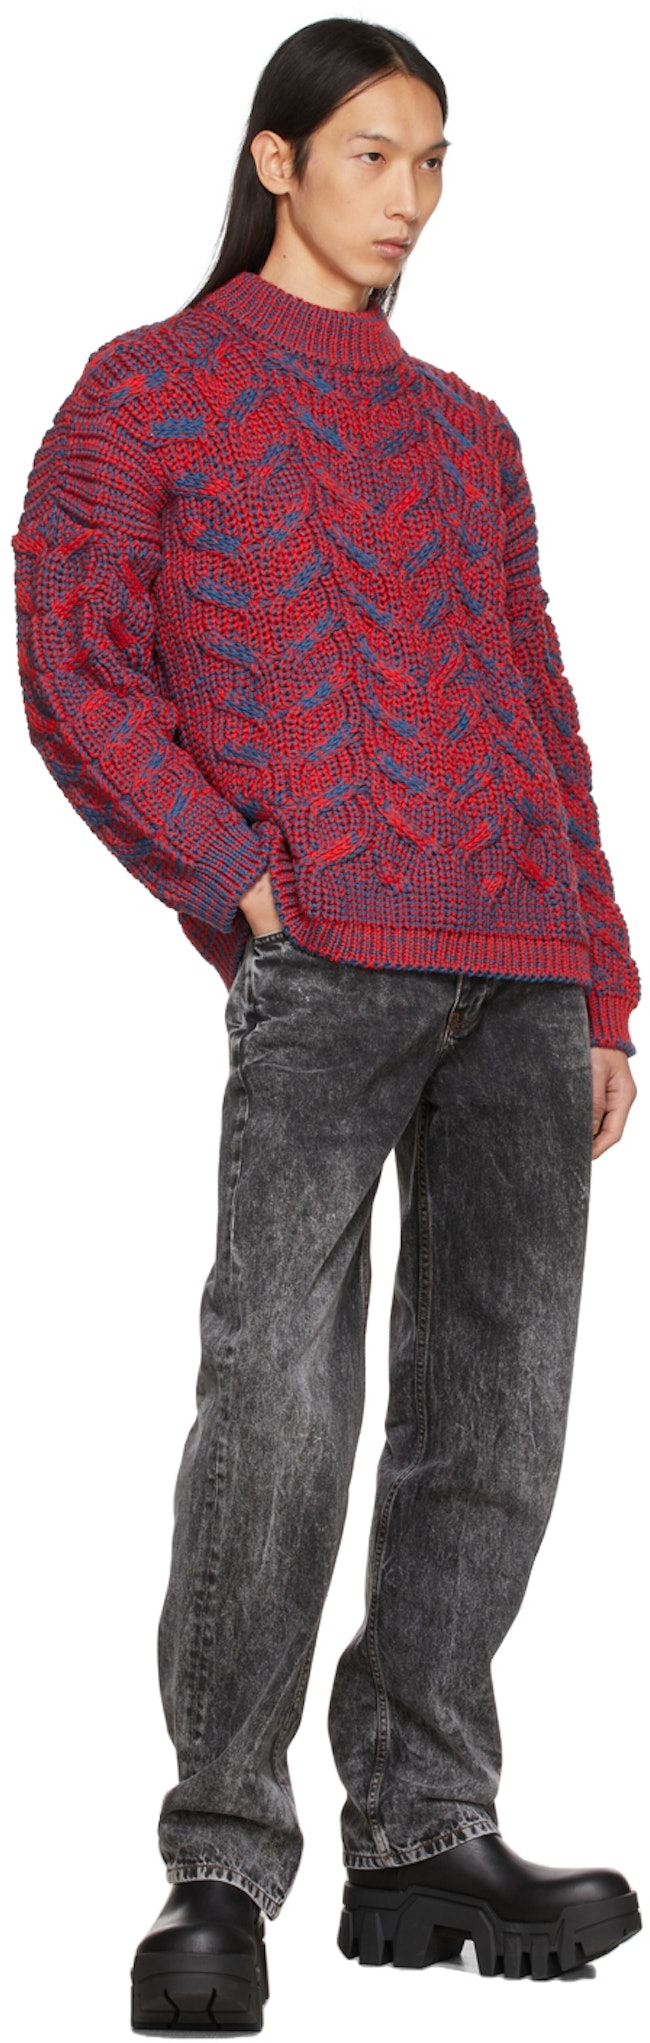 Red & Navy Wool Cable Knit Sweater: additional image